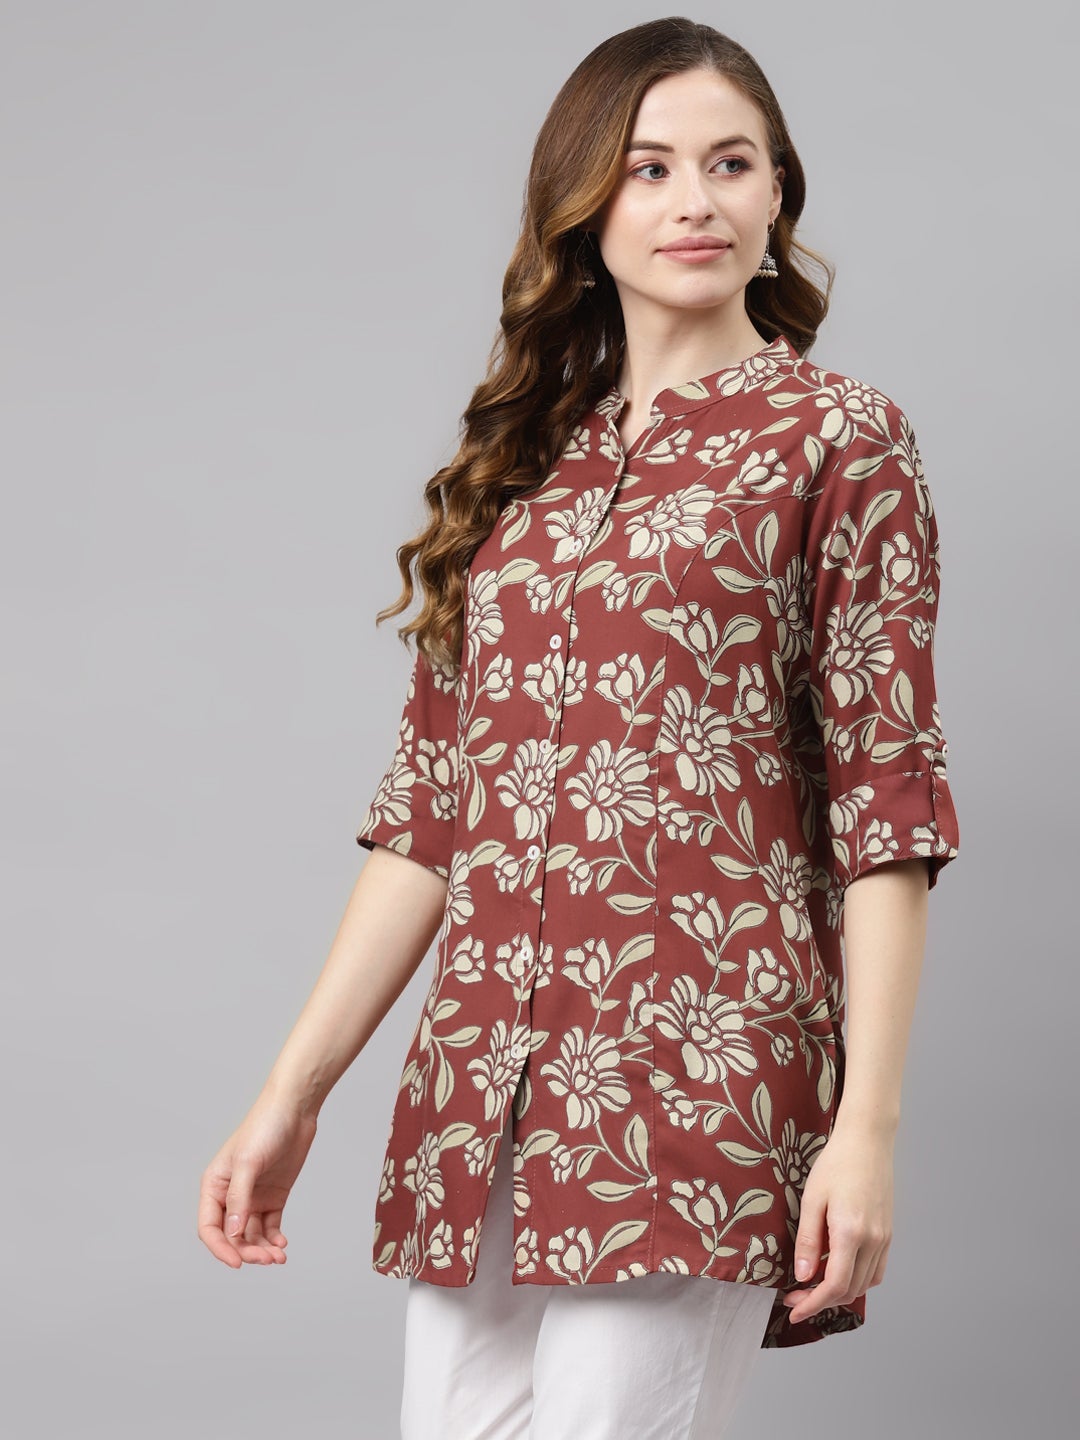 Women's Maroon Floral Rayon Top - Noz2Toz